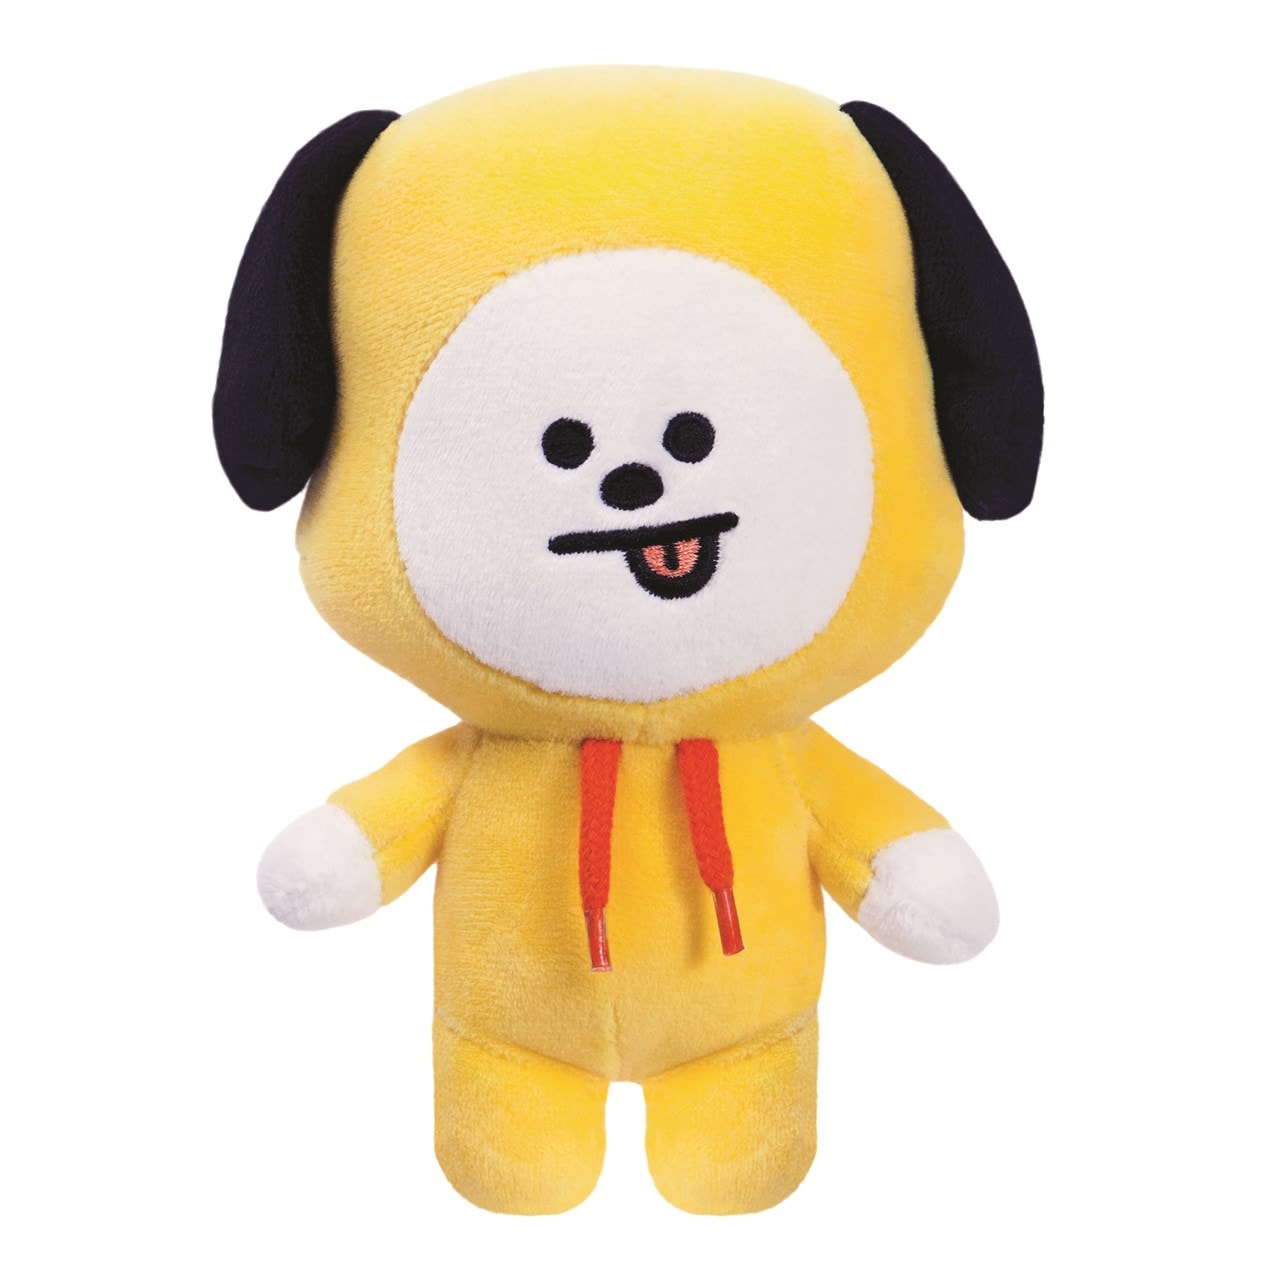  Chimmy  BT21  Small Plush Plush Free shipping over 20 